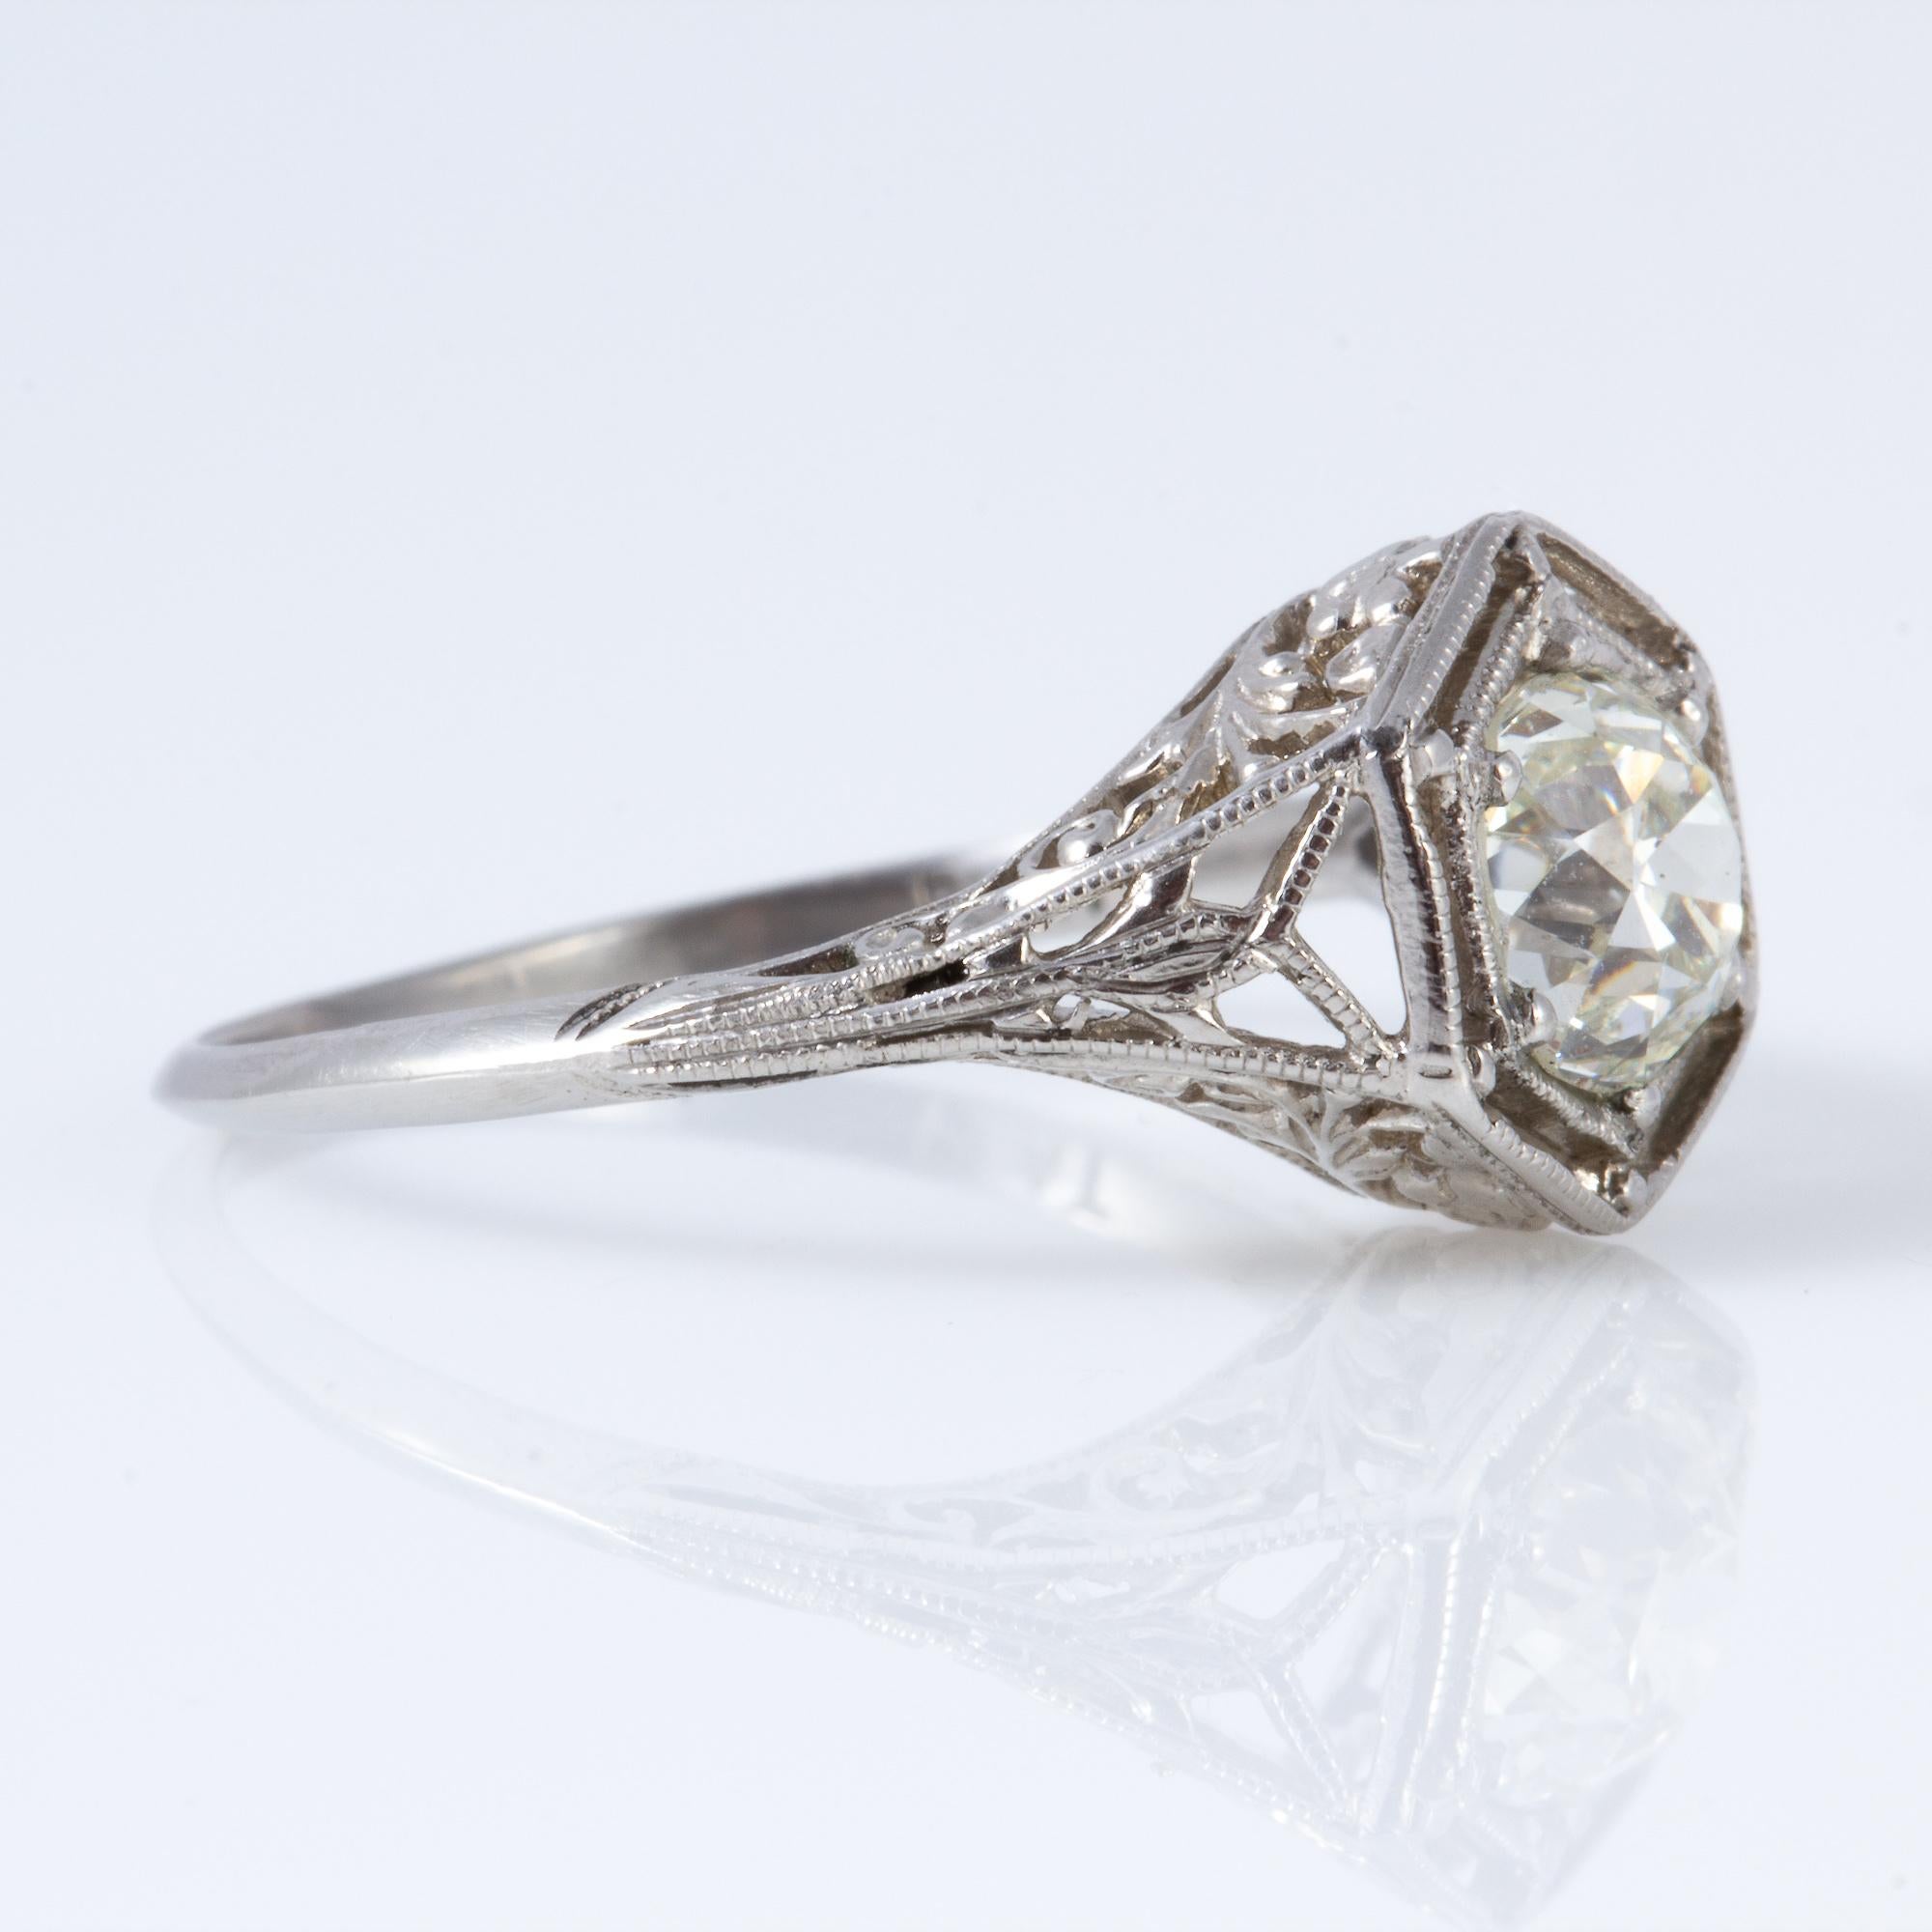 Platinum setting with @.90ct. center stone.  Beautifully cut, with just a touch of yellow to the stone.  Looks to be from the very early 20th century, probably between 1900 and 1910.  